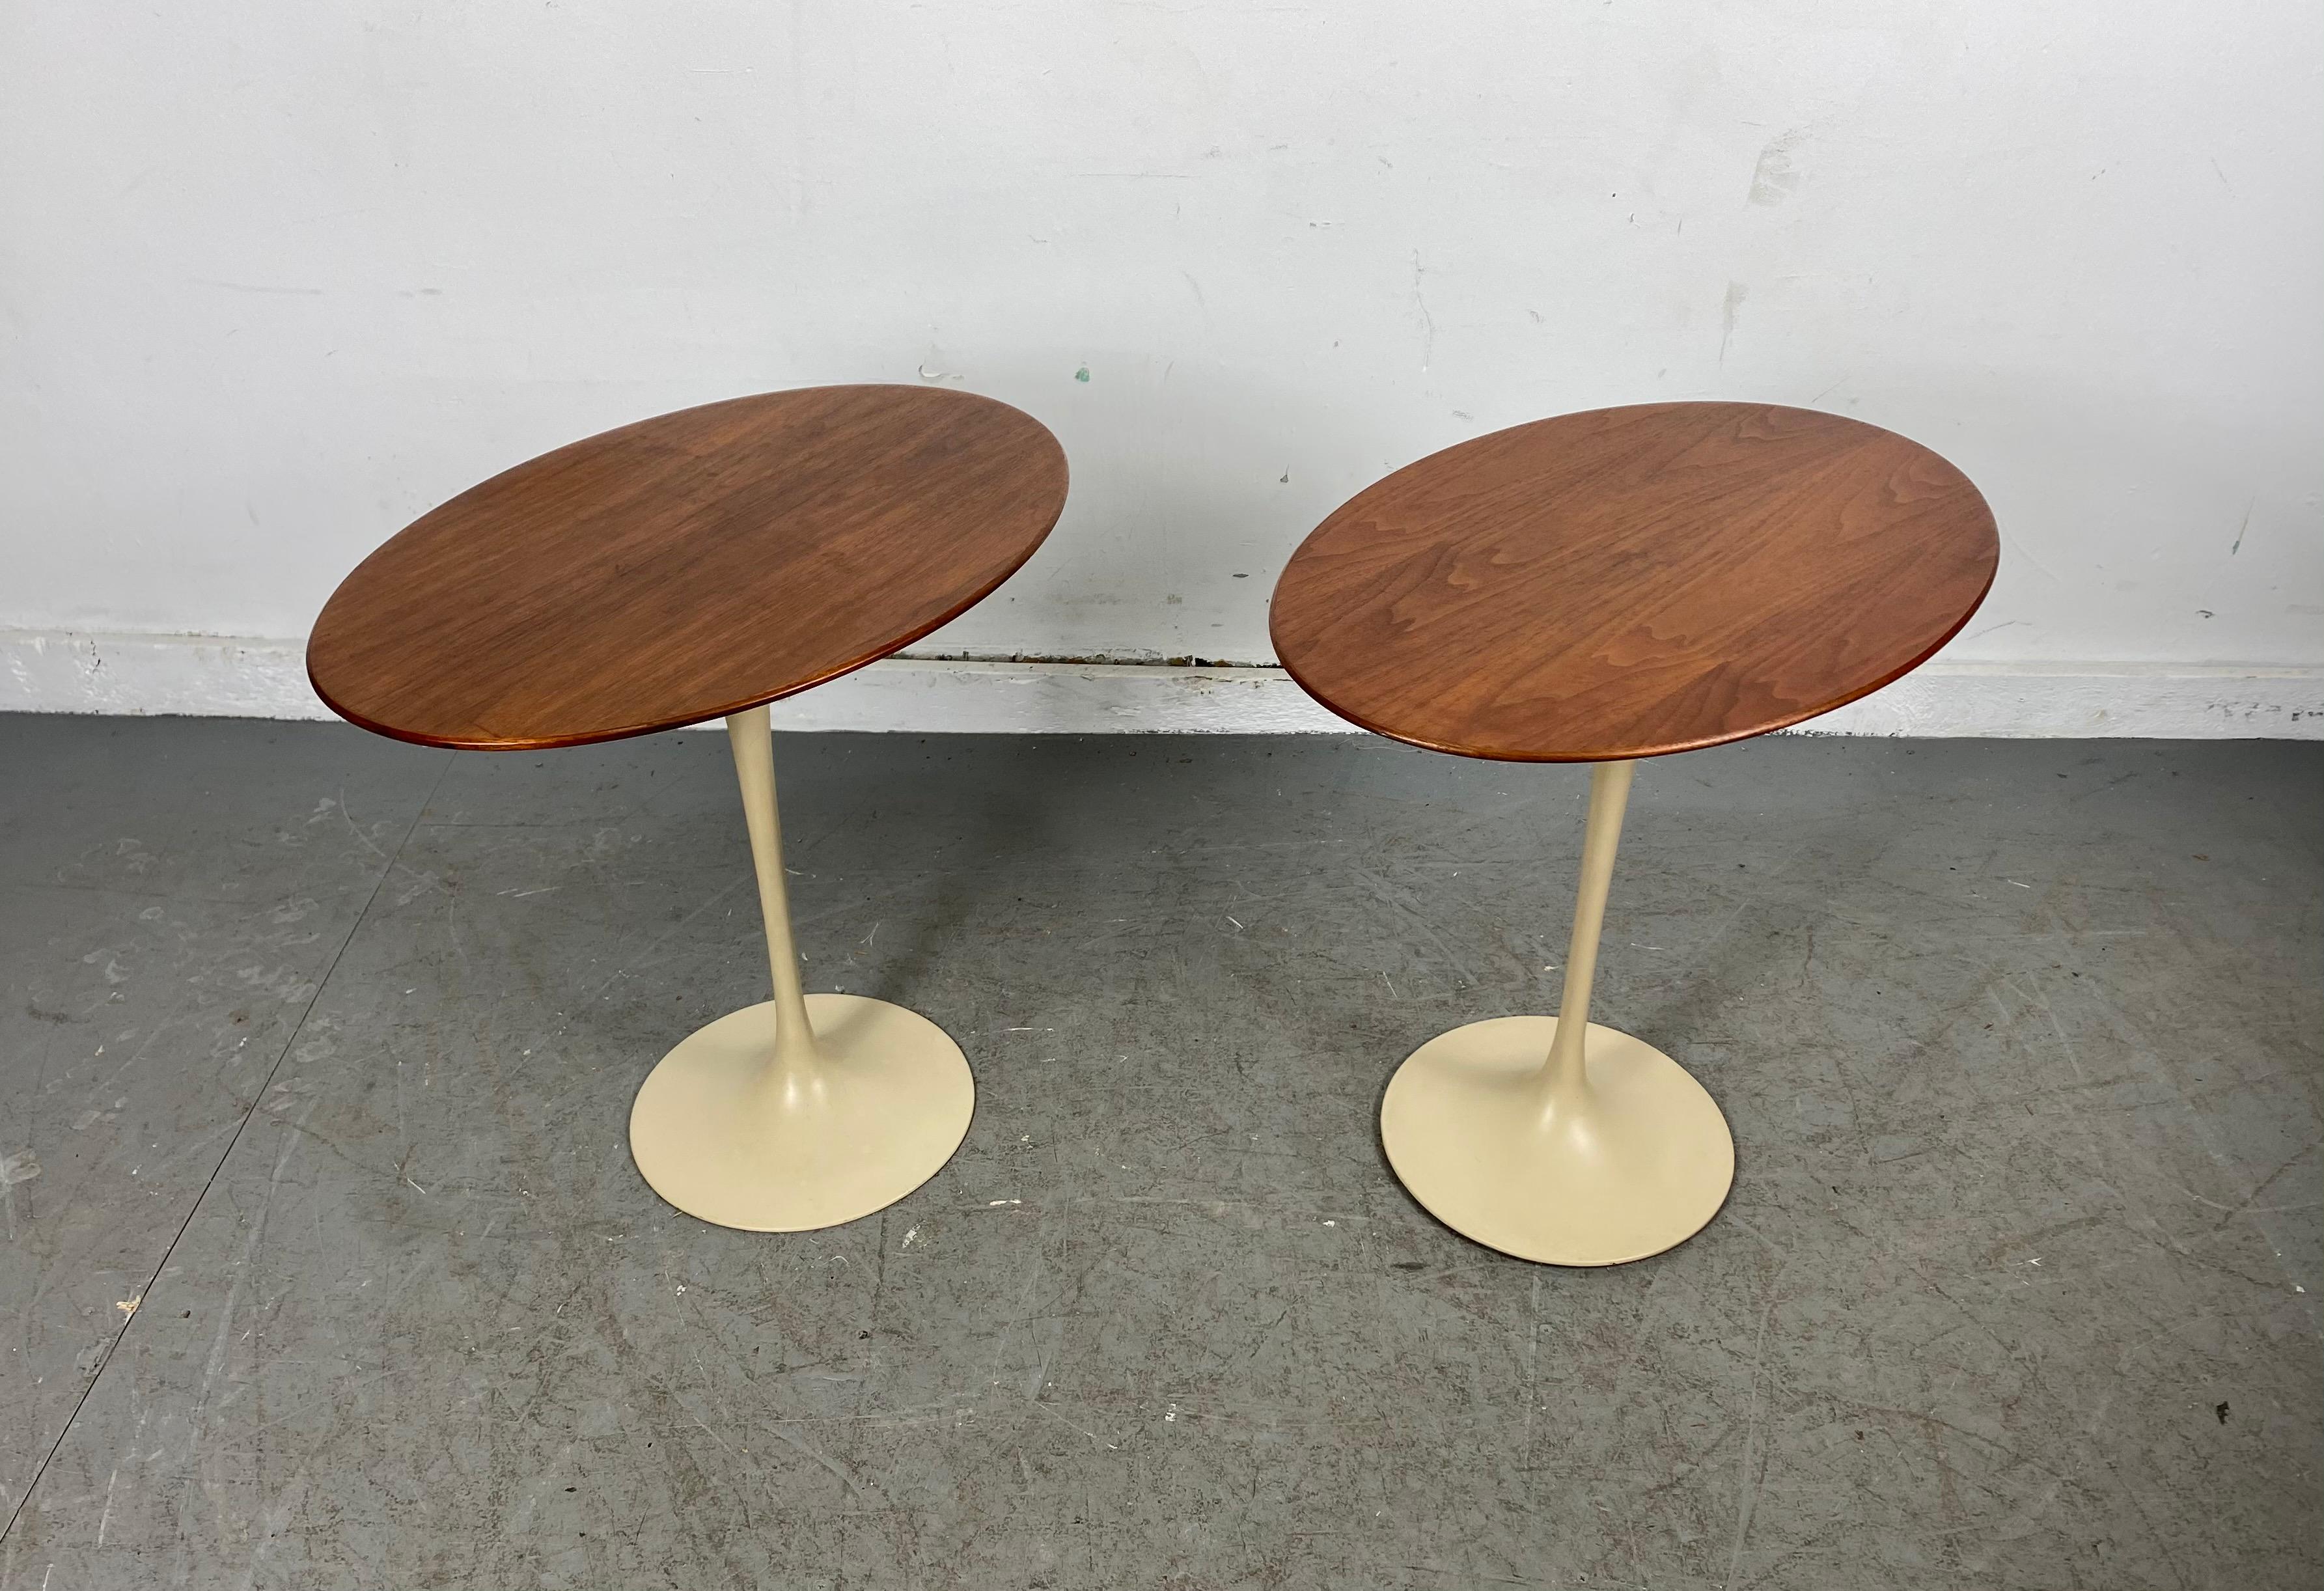 Cast Early Pair of Knoll Tulip Oval Side Tables by Eero Saarinen, circa 1970s